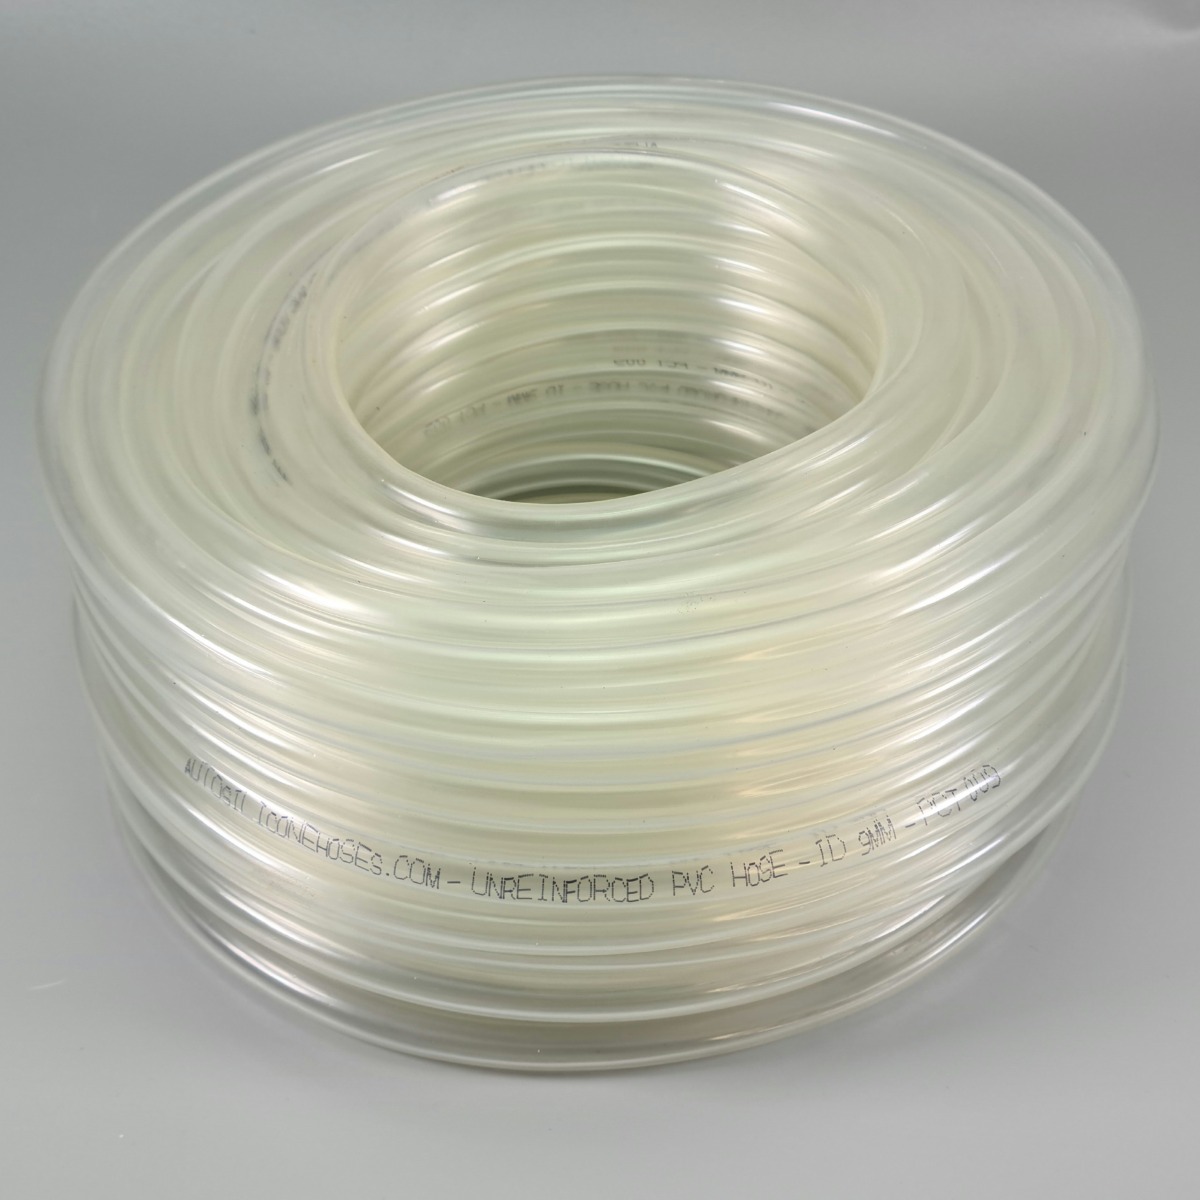 Clear PVC Plastic Tube/Pipe/Hose UK Stock Same Day Dispatch Durable Fast 